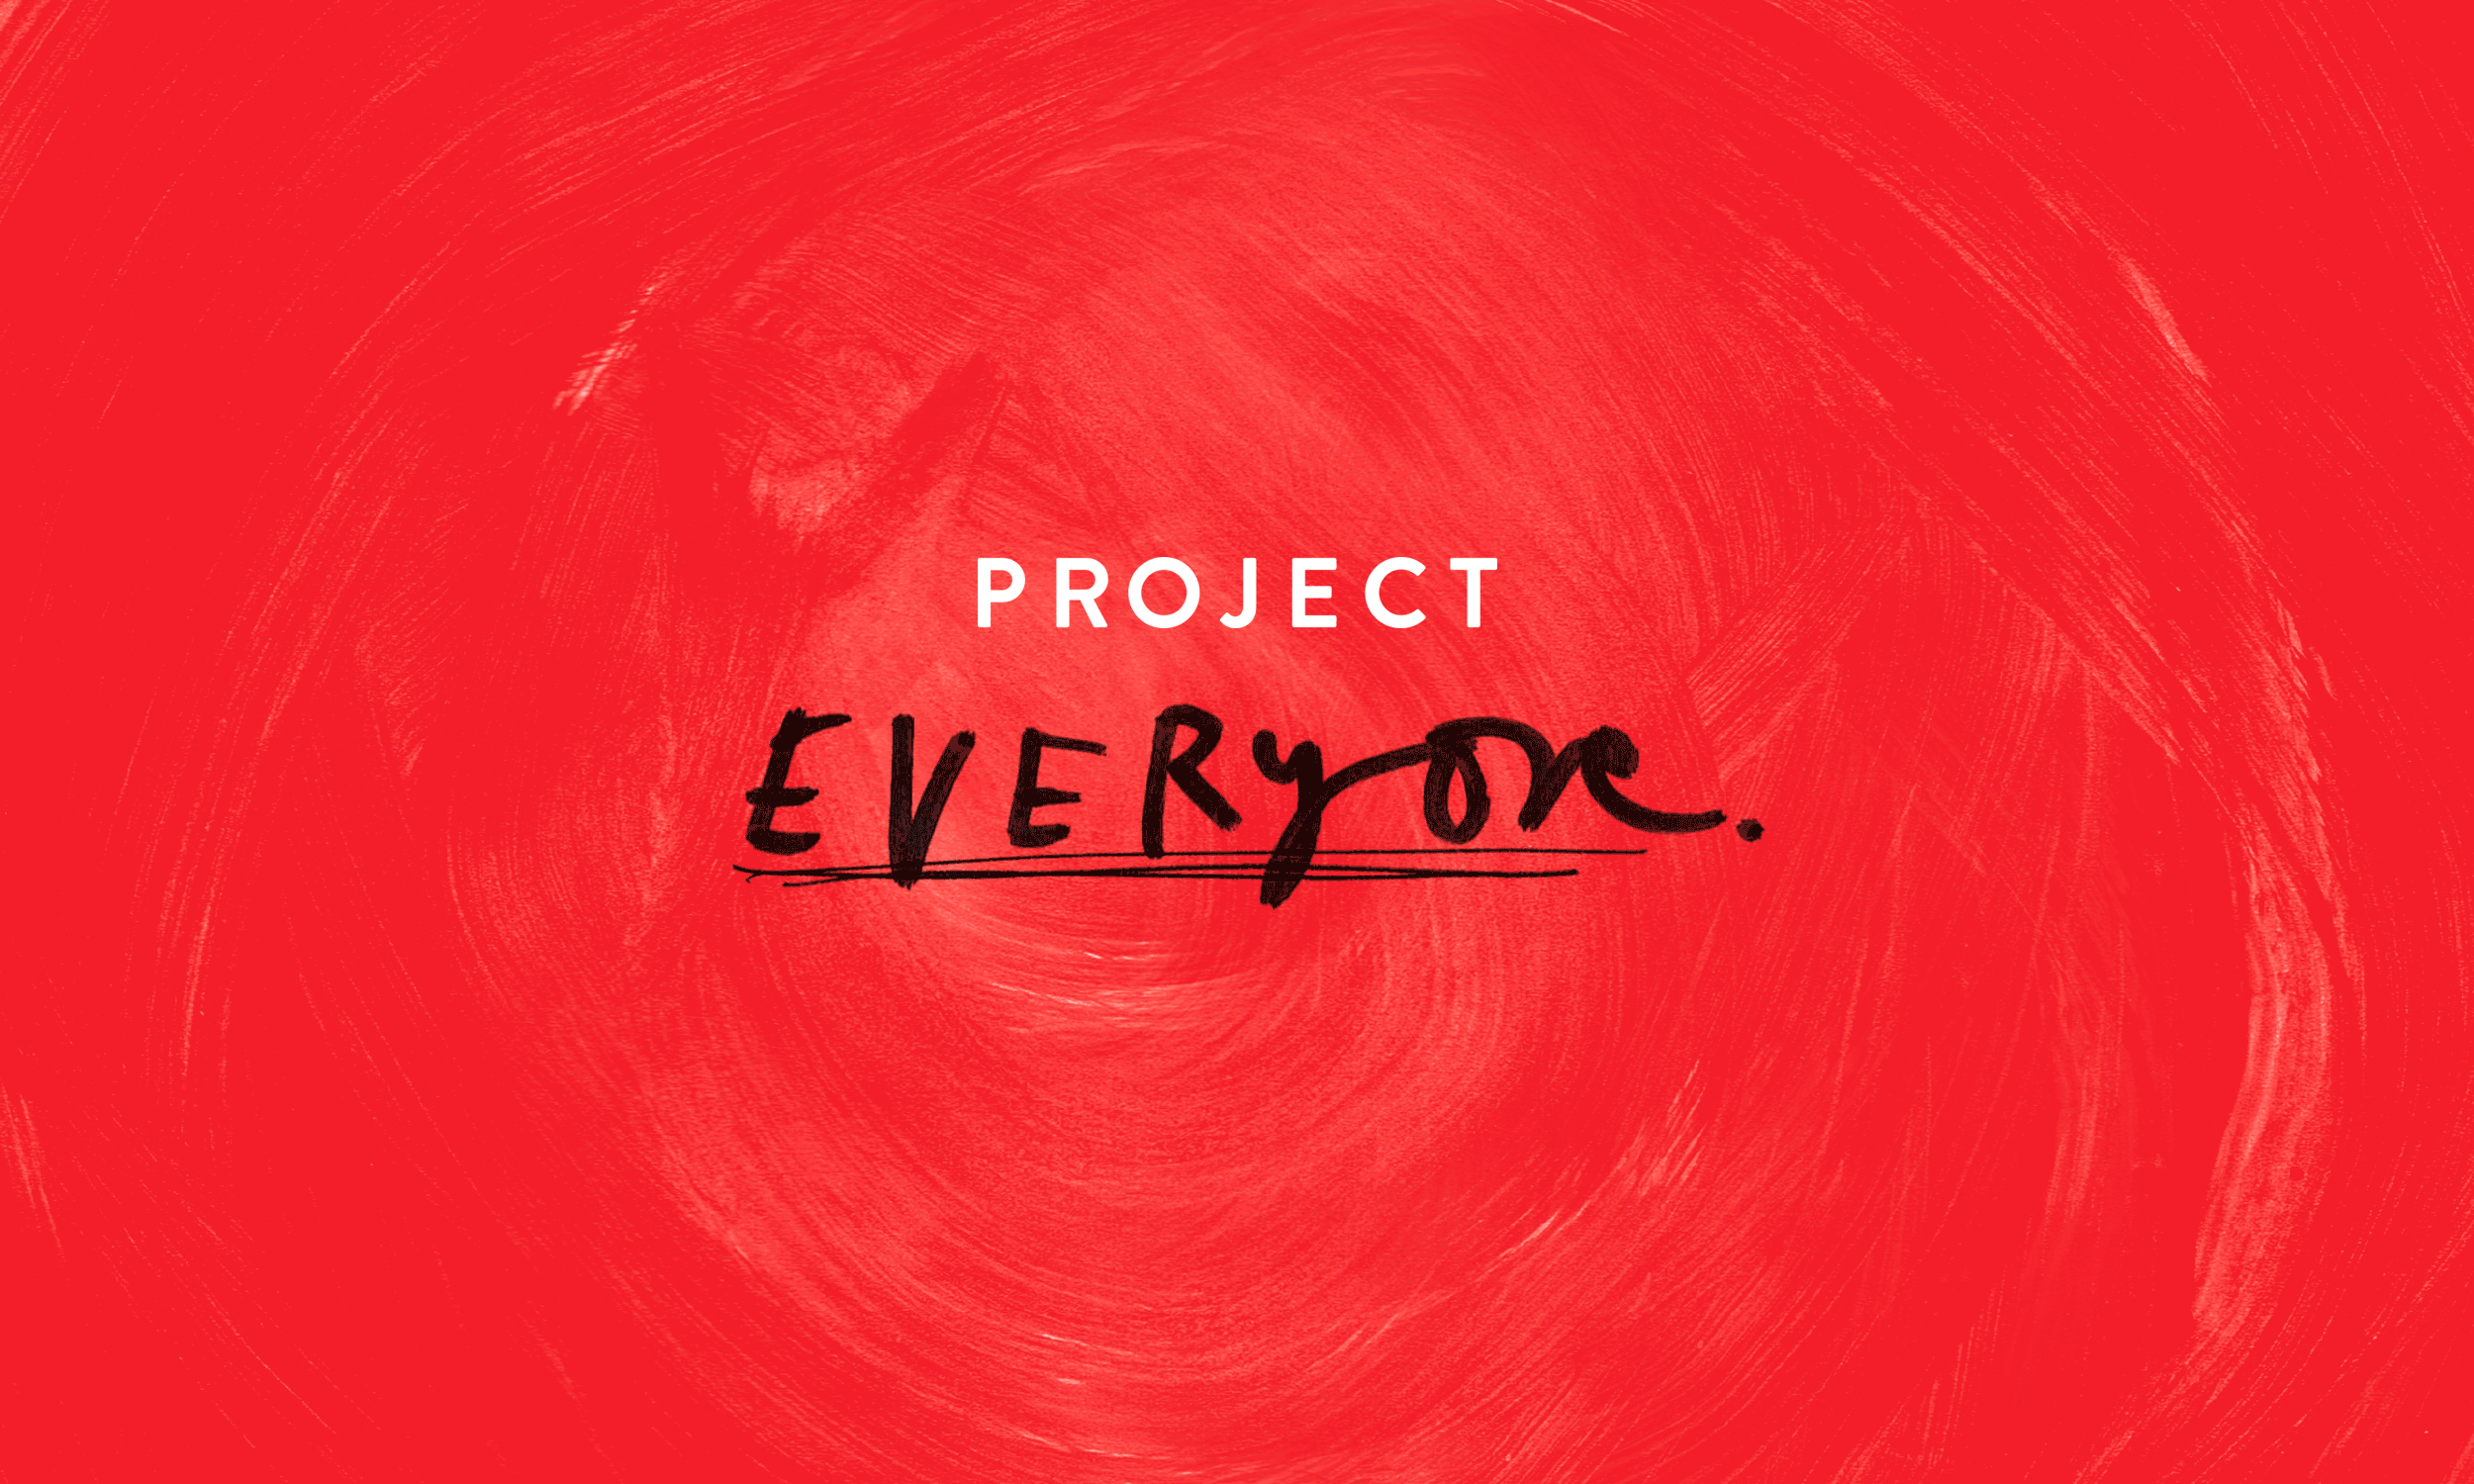 Everyone Logo - Project Everyone logo, animated to demonstrate how many handwritten ...